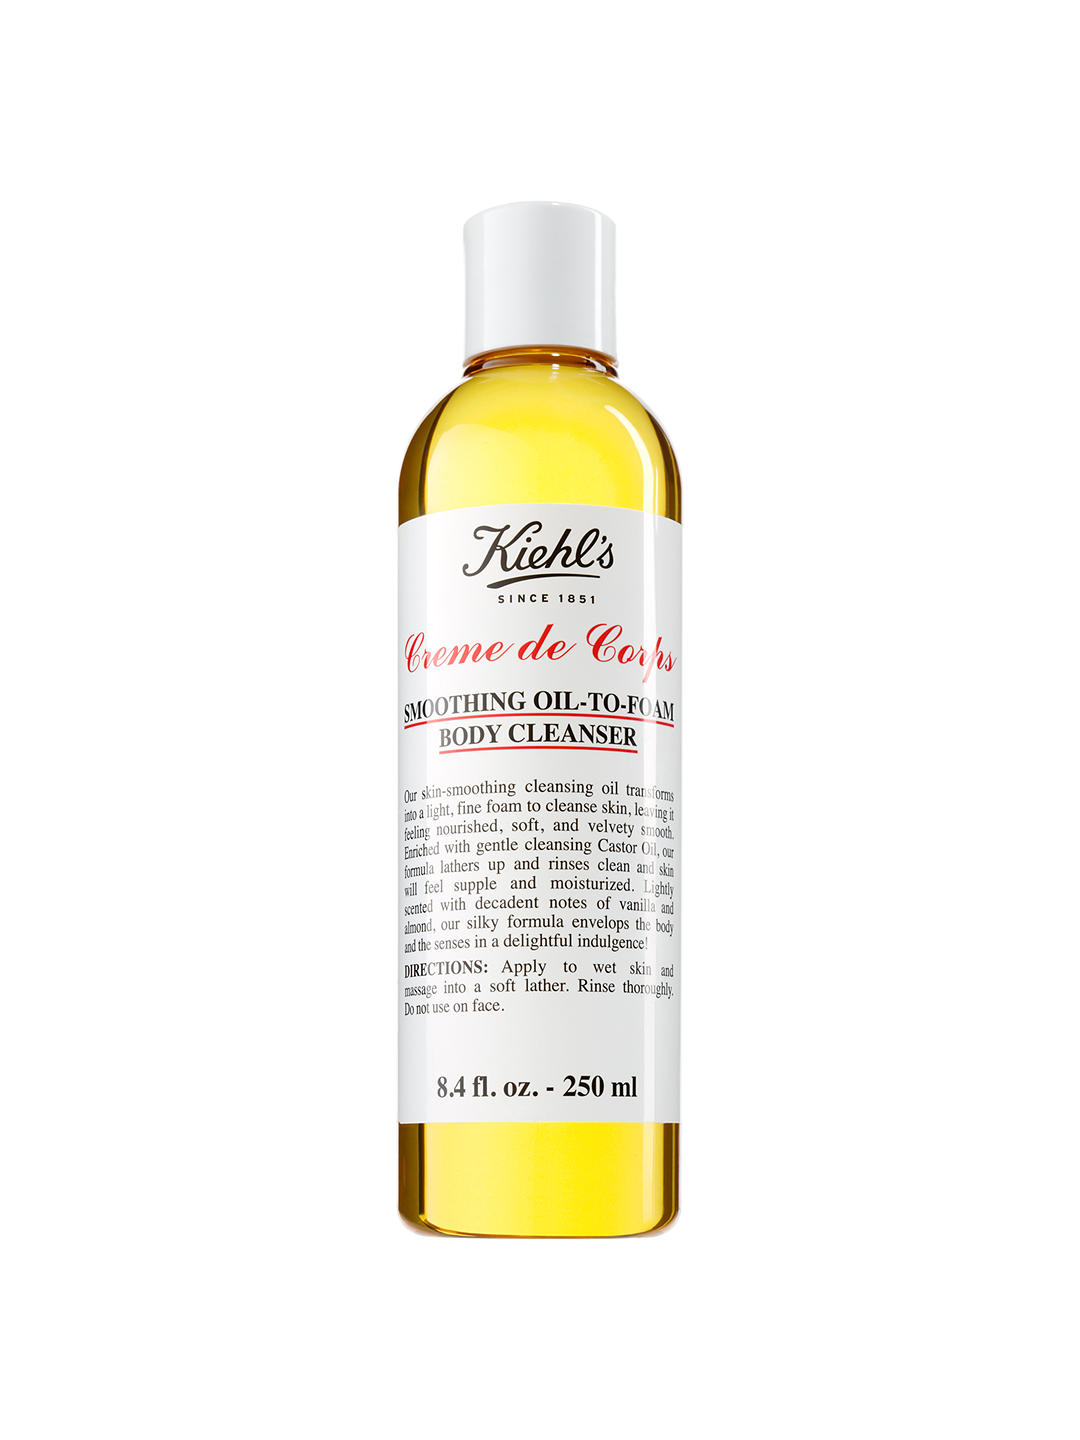 Kiehl's Creme de Corps Smoothing Oil-To-Foam Body Cleanser, 250ml 1